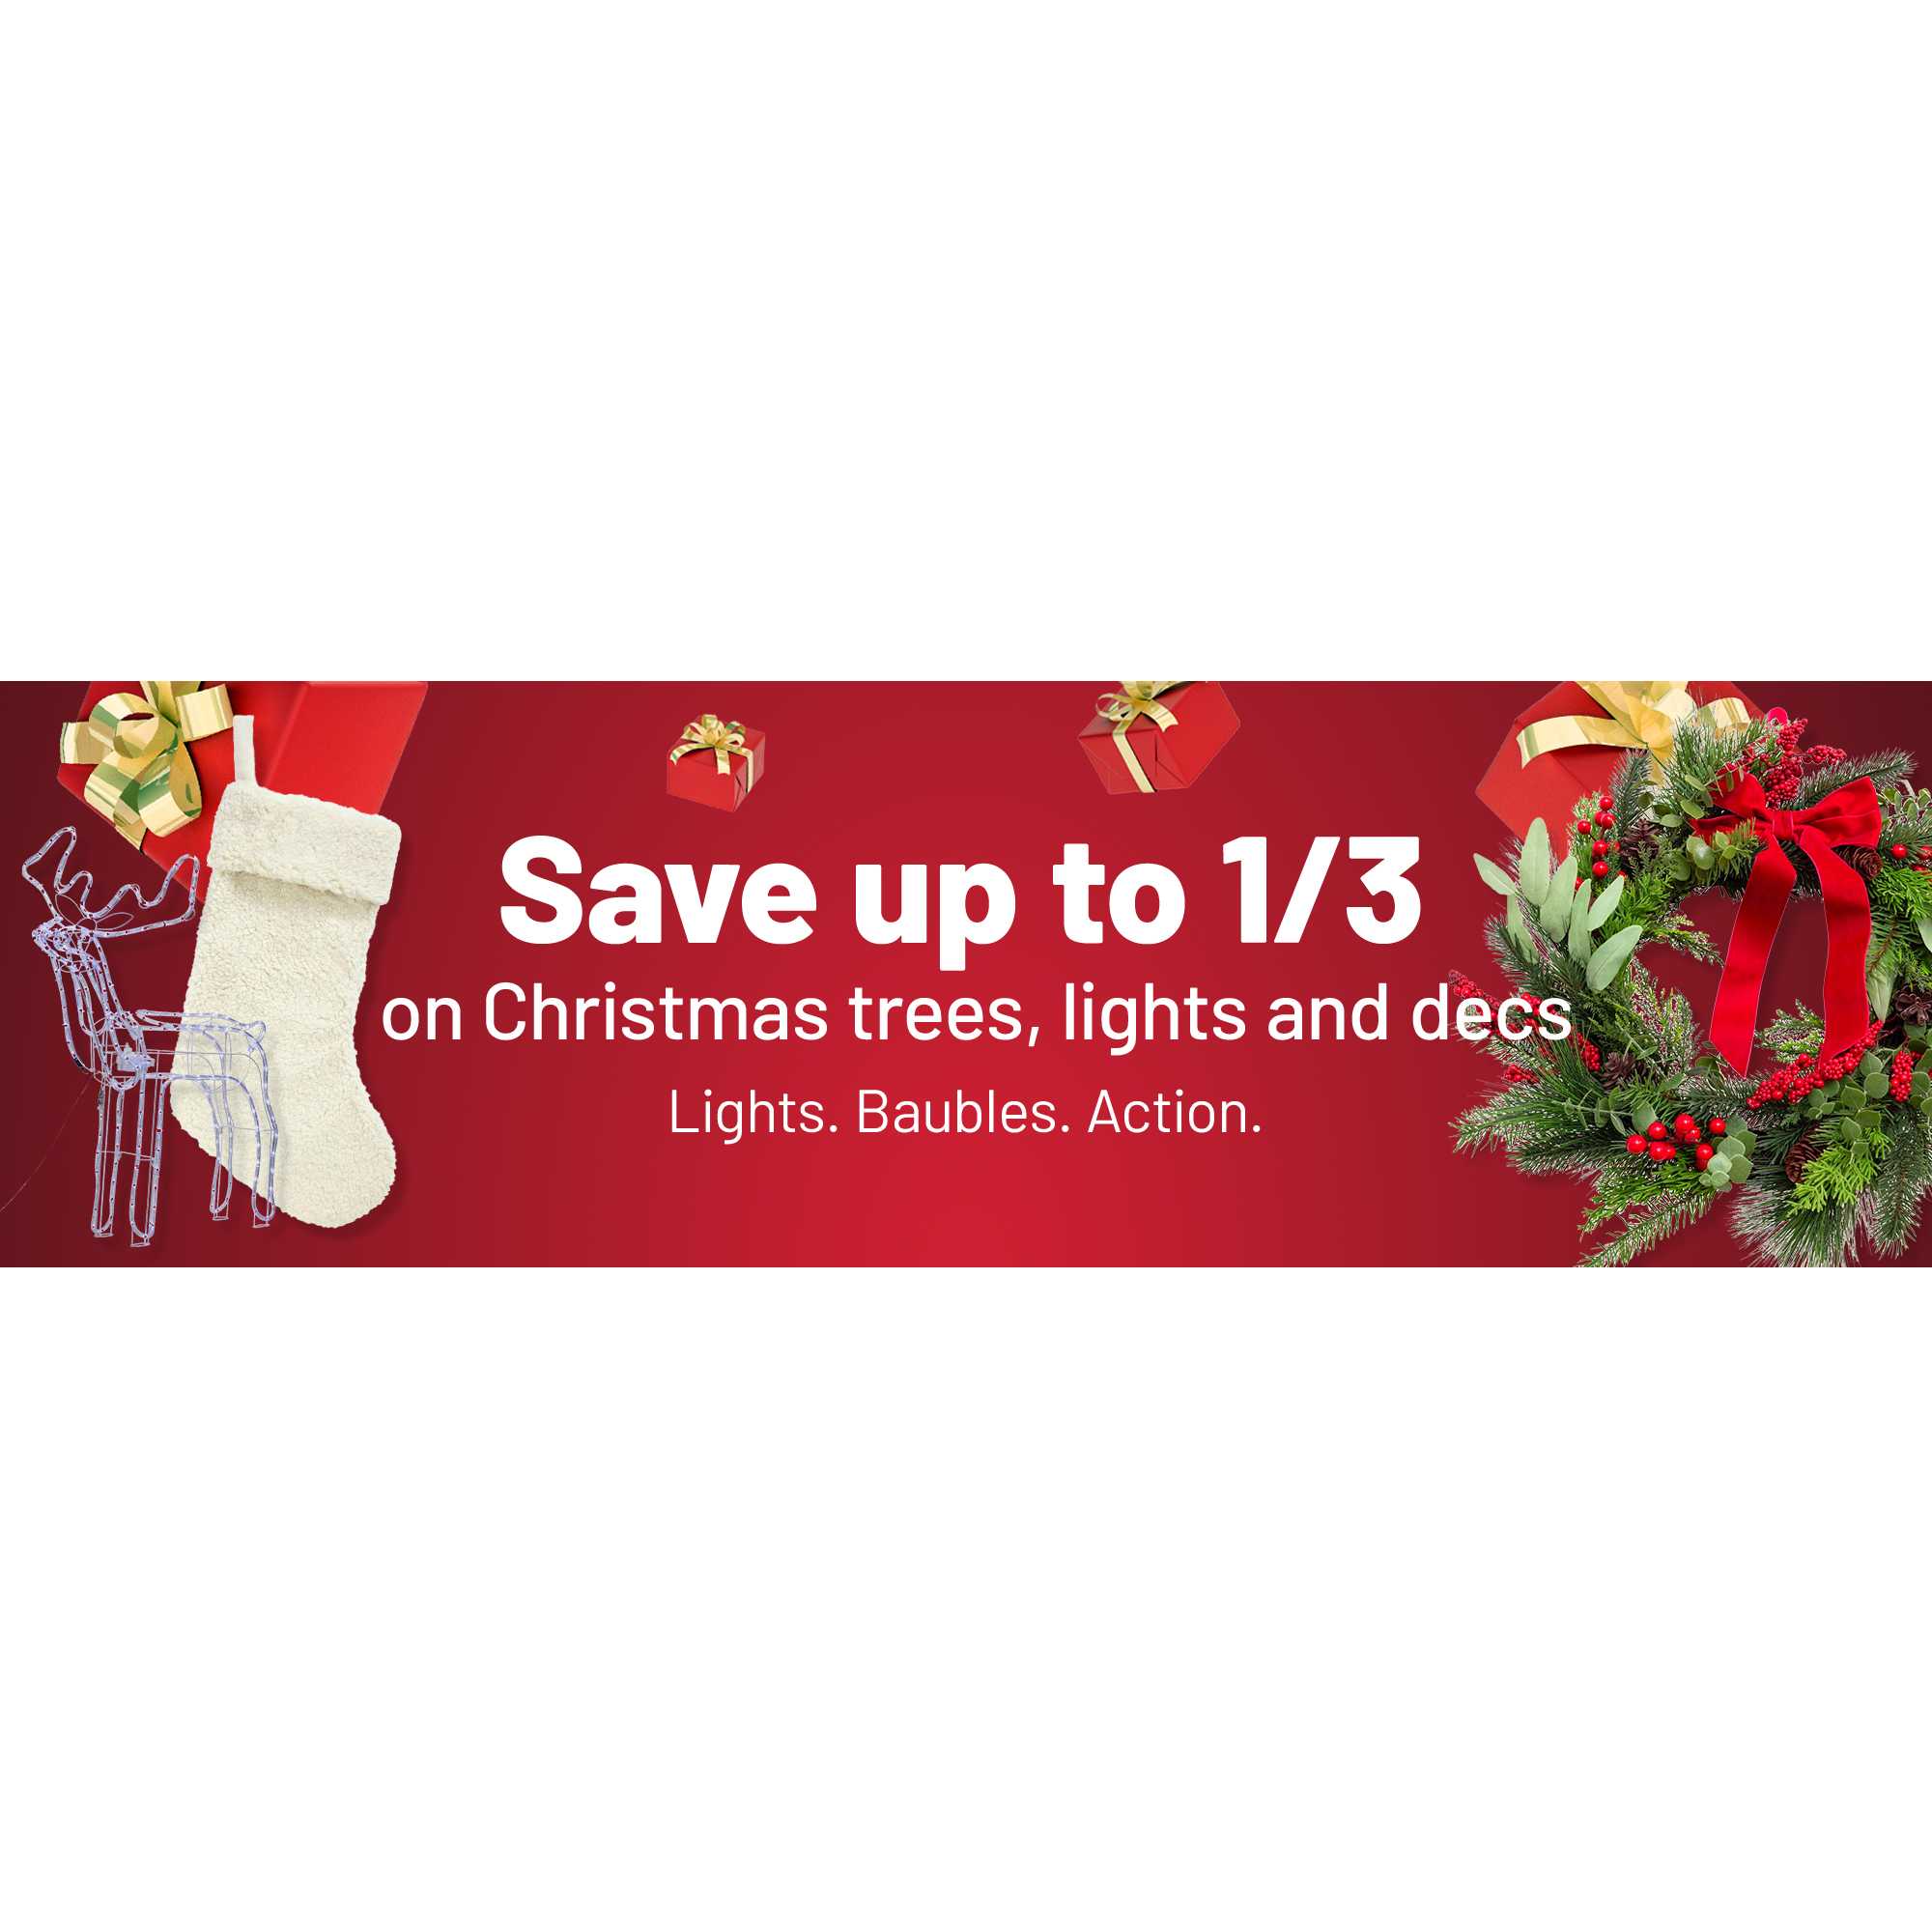 Save up to 1/3 on Christmas trees, lights and decs. Lights. Baubles. Action.